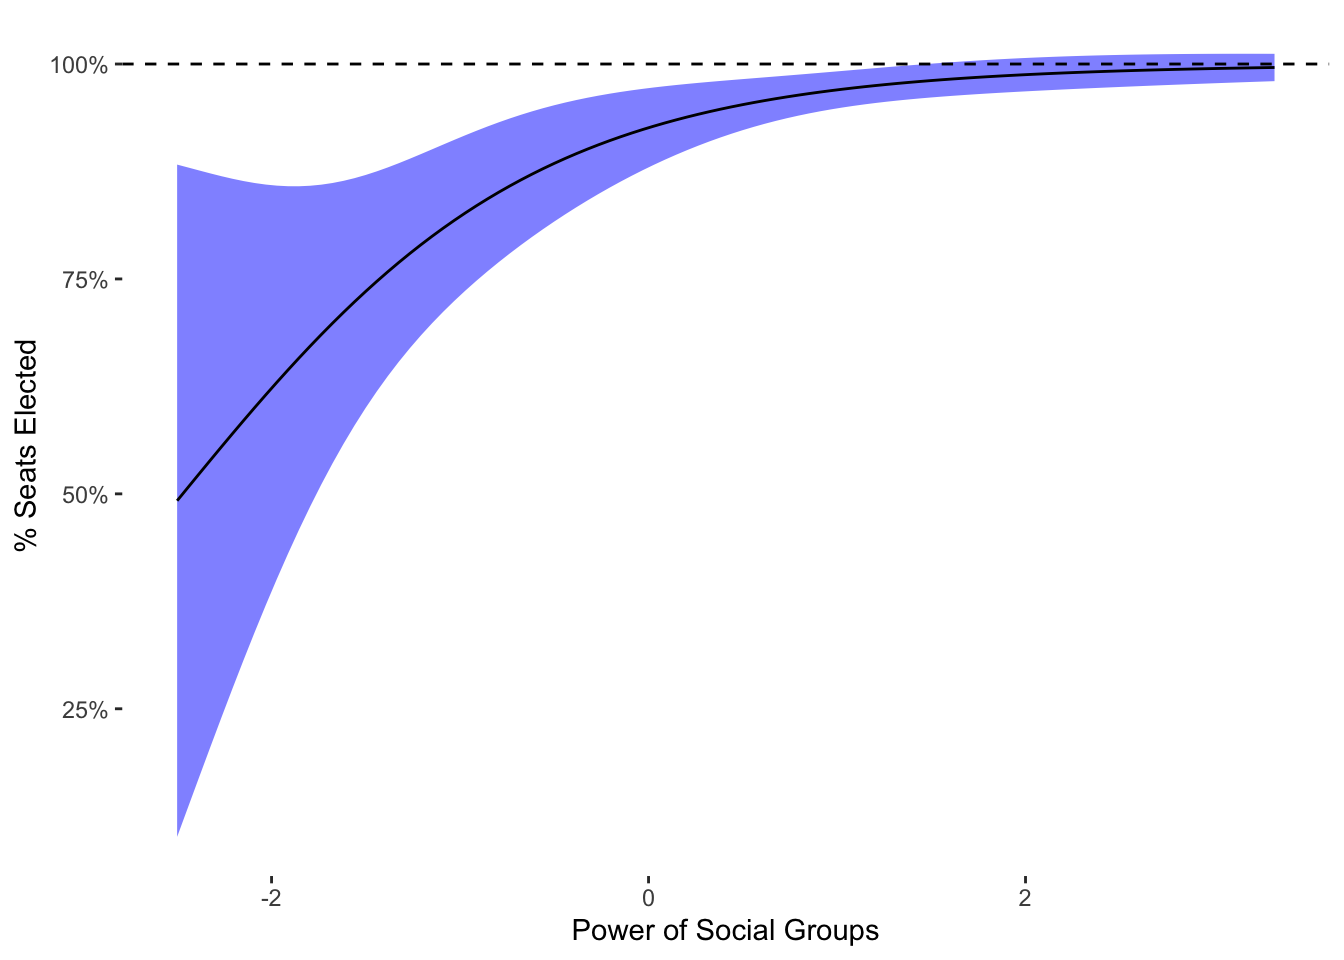 Fractional Logit Predicted Values of Elected Lower Chamber Seats Given Power of Social Groups